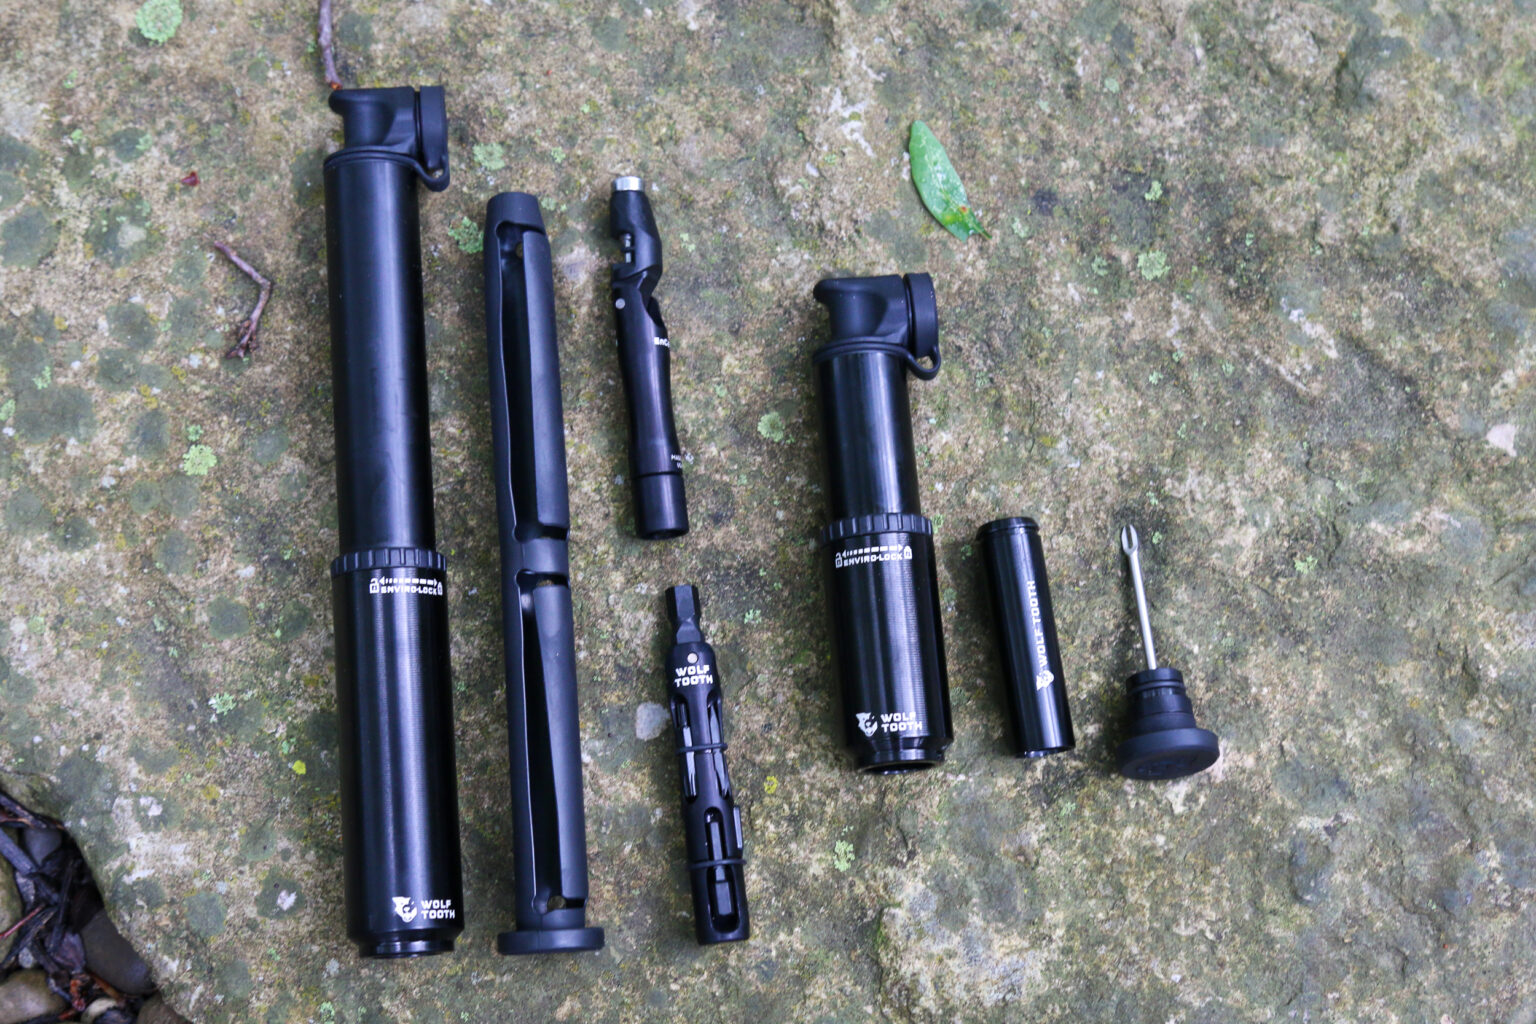 Wolf tooth components Encase bike pumps tool storage